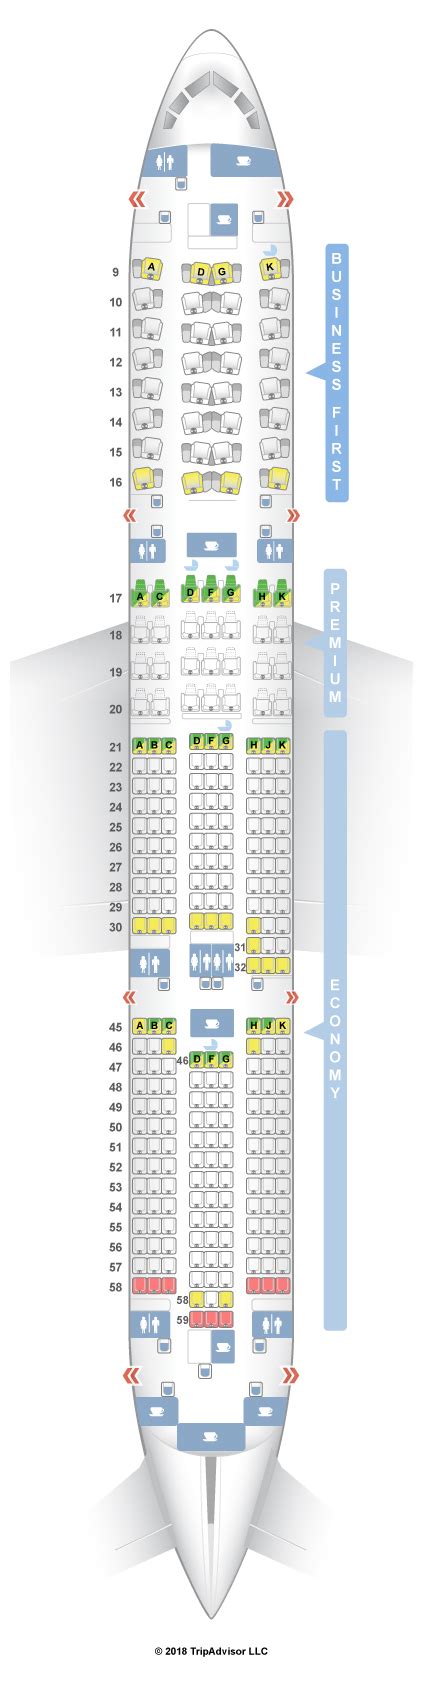 United Boeing 787 9 Seat Map